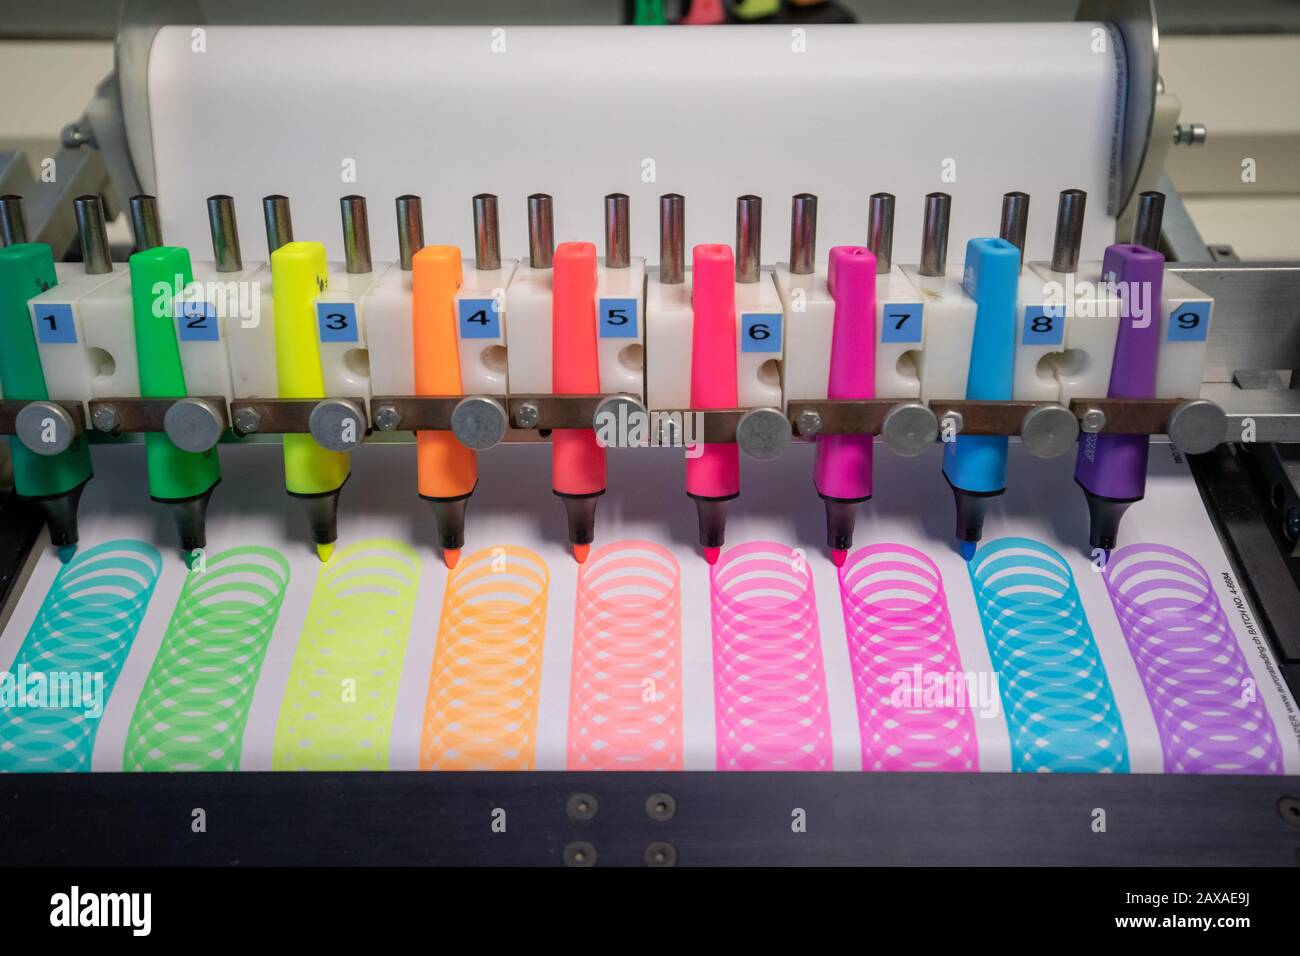 05 December 2019, Bavaria, Weißenburg: Highlighters "Stabilo Boss" of the  brand Schwan Stabilo (Schwanhäußer GmbH & Co. KG), are mounted in the  laboratory of the company's production in a transcription machine, which